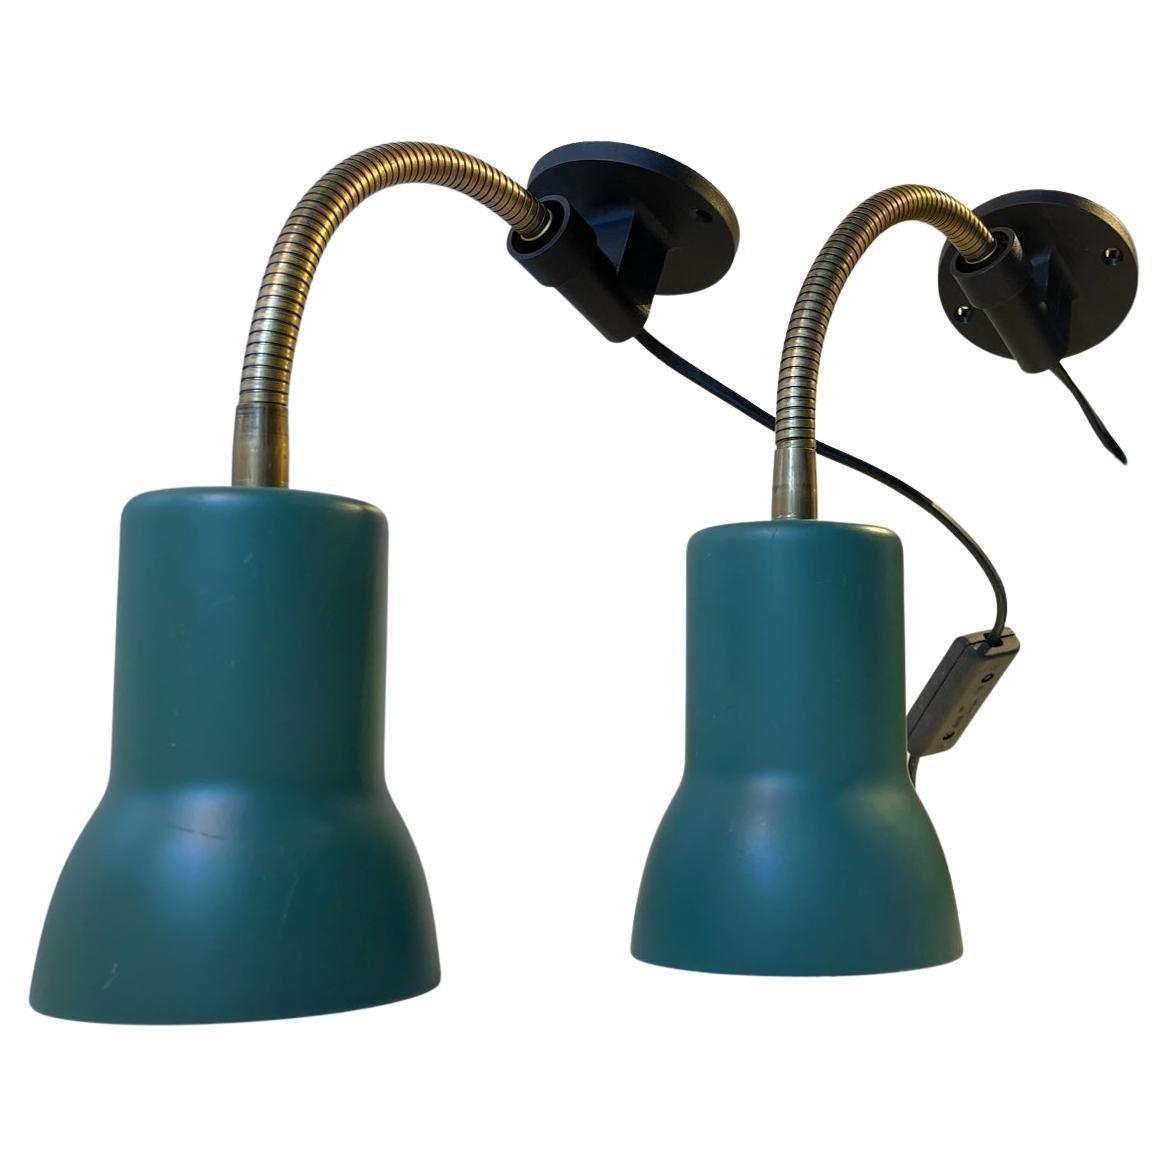 A pair of fully adjustable brass wall lights with teal green aluminum shades and black acrylic wall mounts. Manufactured by Lyskær in Denmark circa 1970. Measurements: H/L: 34.5 cm, Diameter: 9.5 cm (shade).